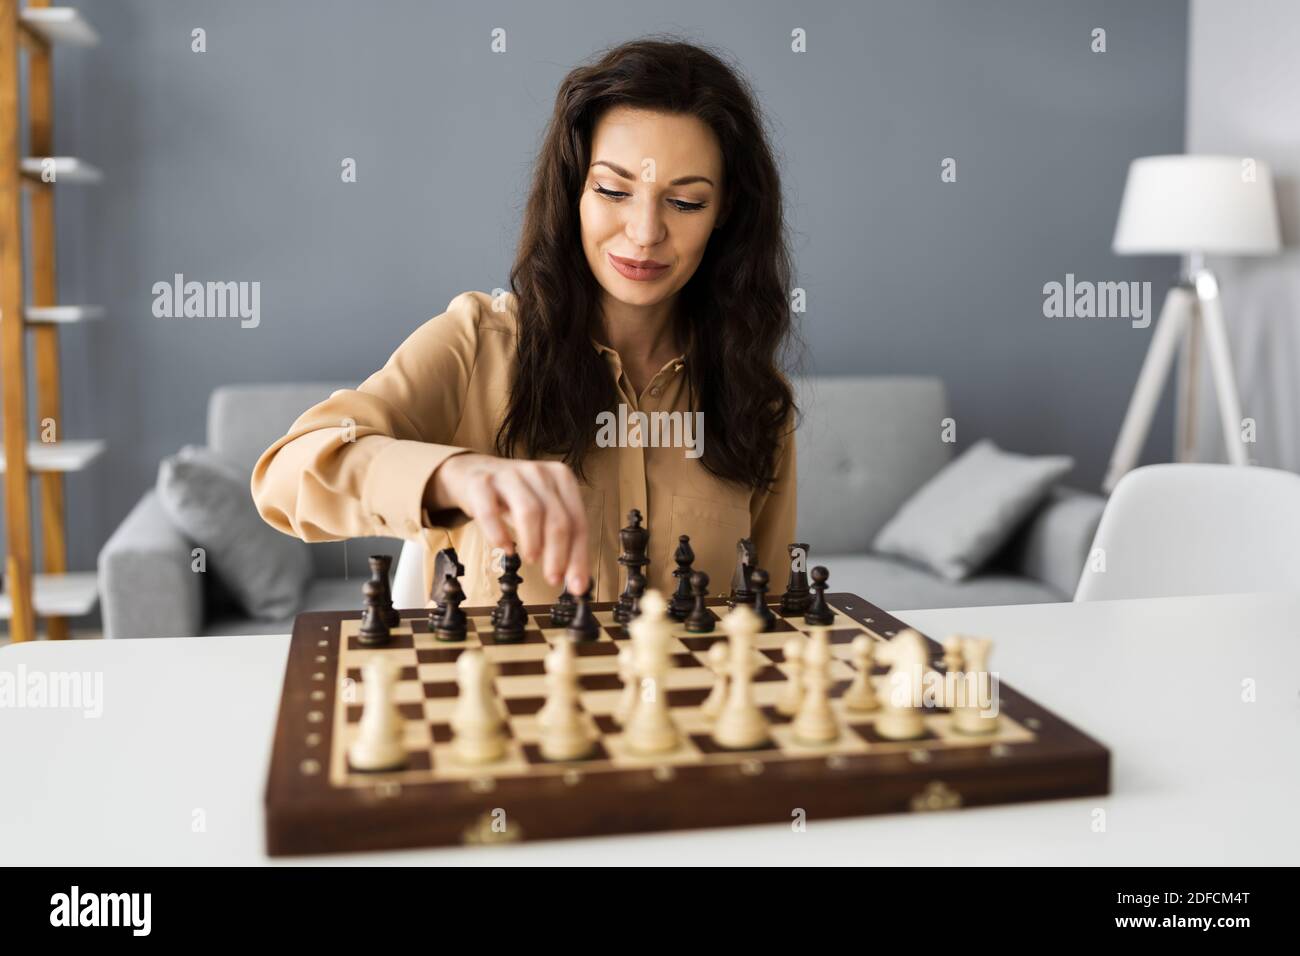 Woman Playing Chess Online Using Video Conference Call Stock Photo